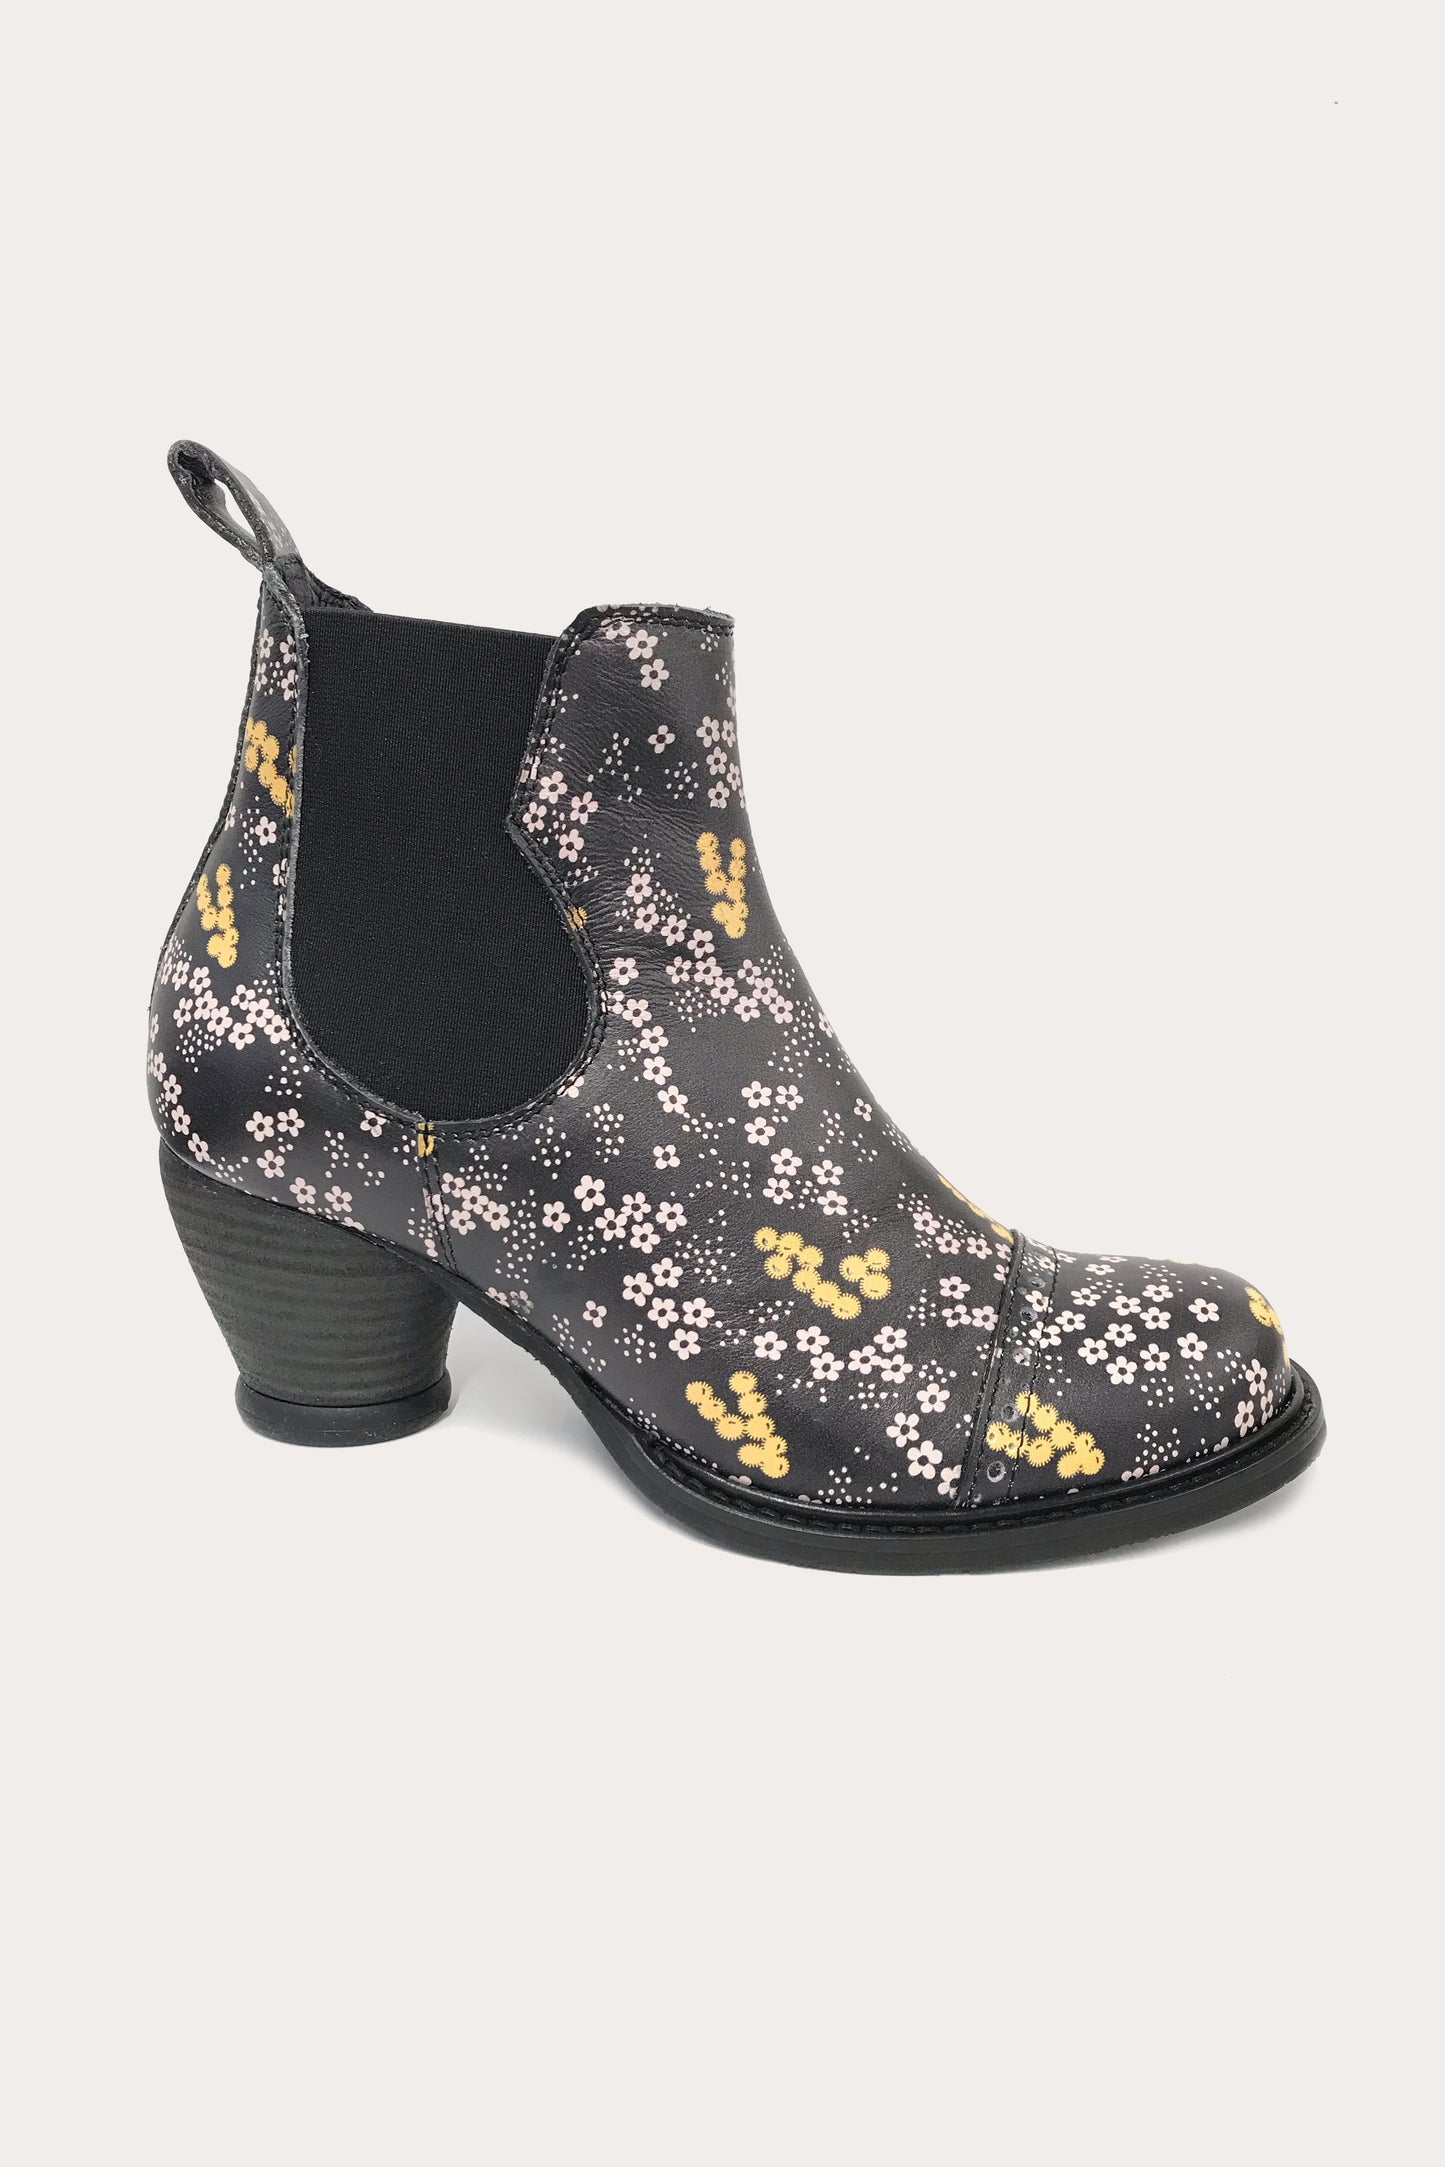 Chelsea Boot, high heel black, white/yellow floral design, side elastic, strap on the back 